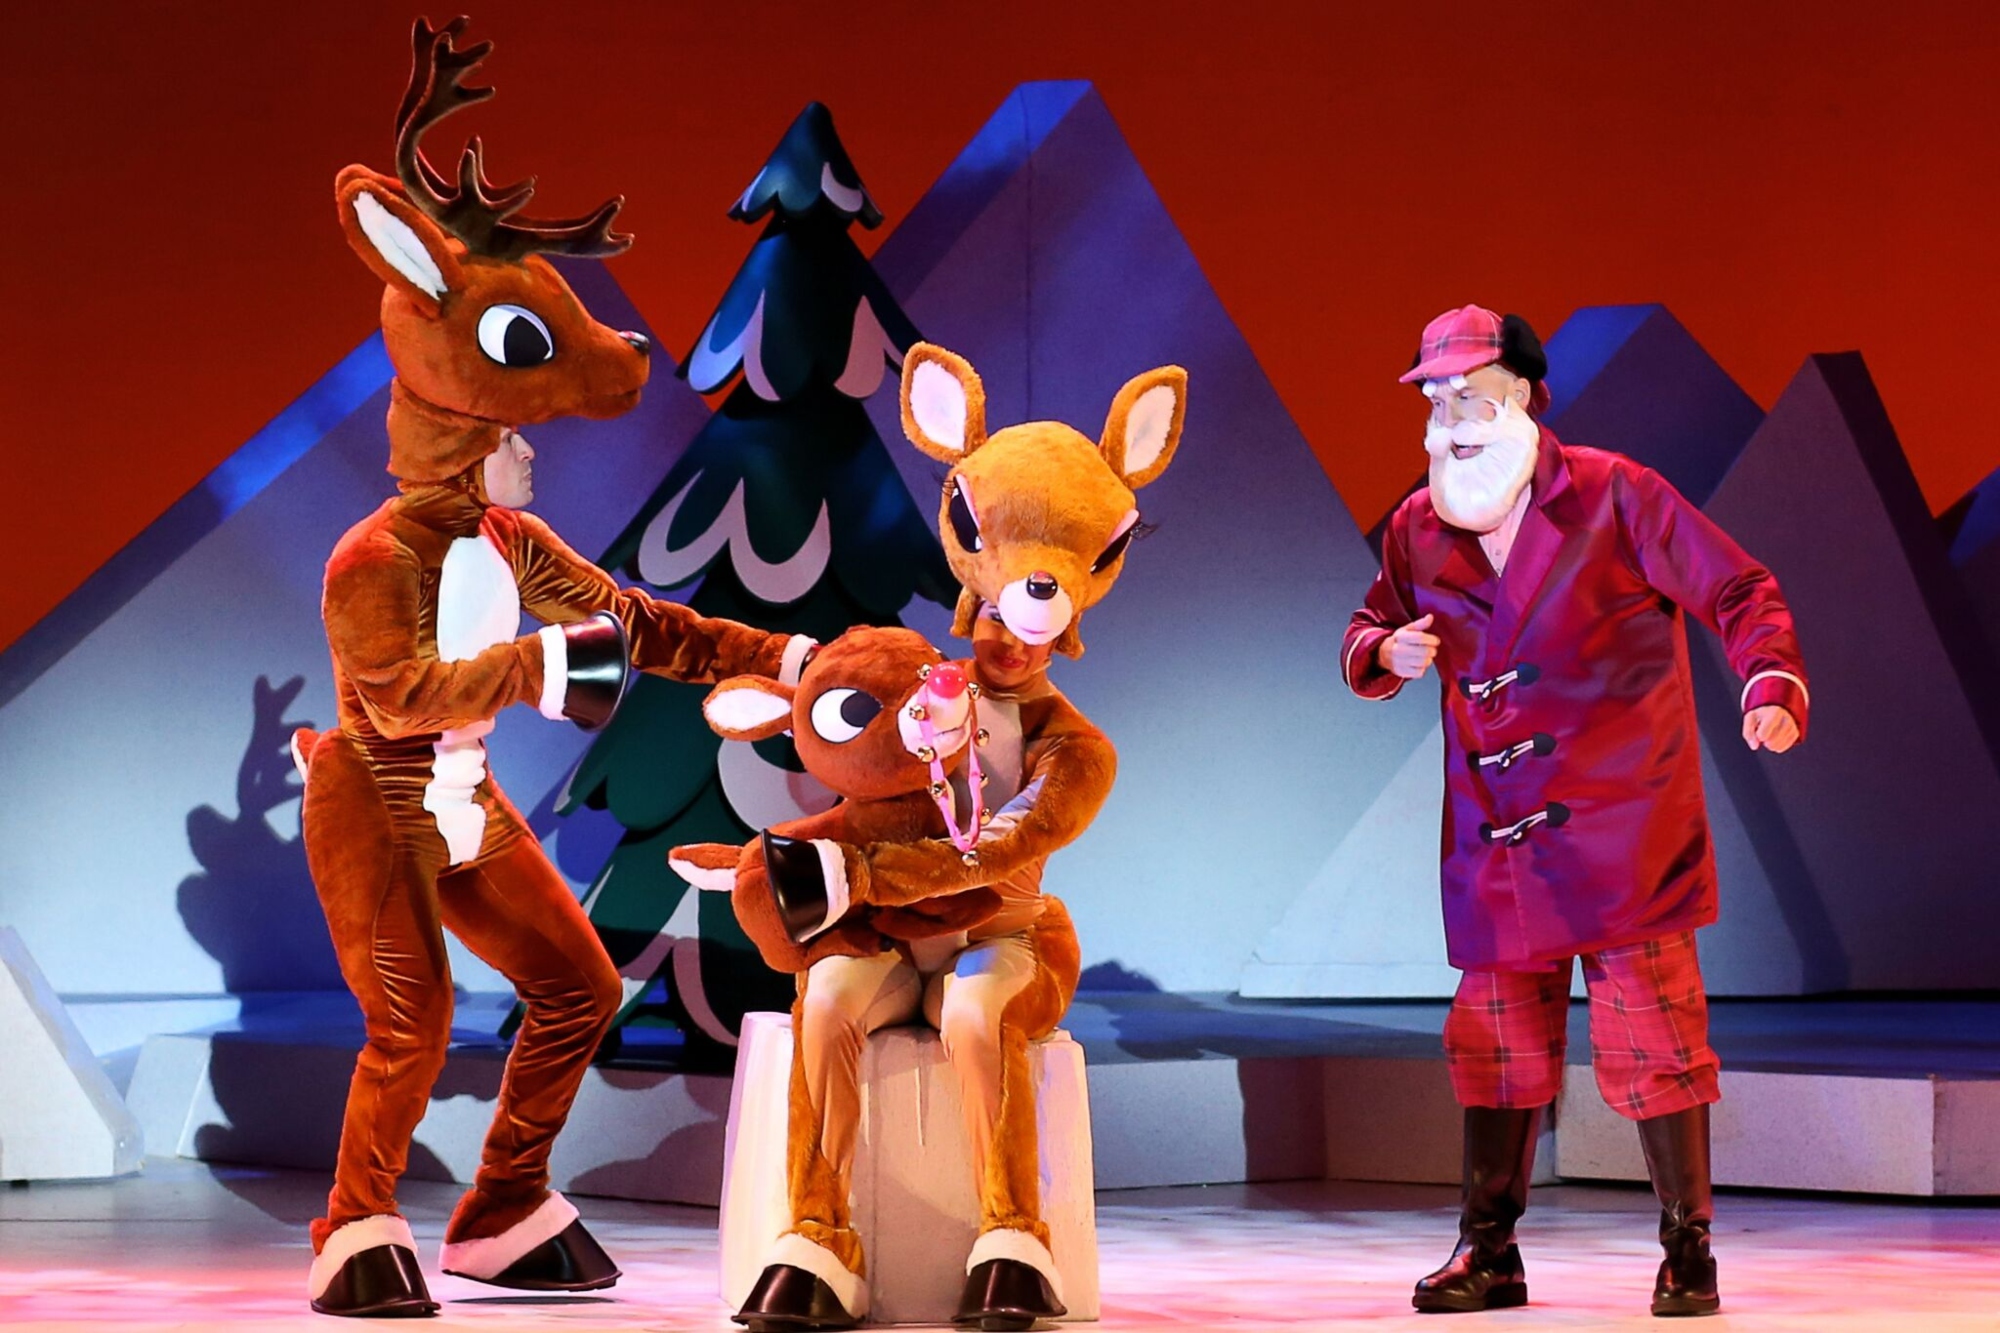 Musical Theater Review: Rudolph The Red-Nosed Reindeer is Cuuuuuute!